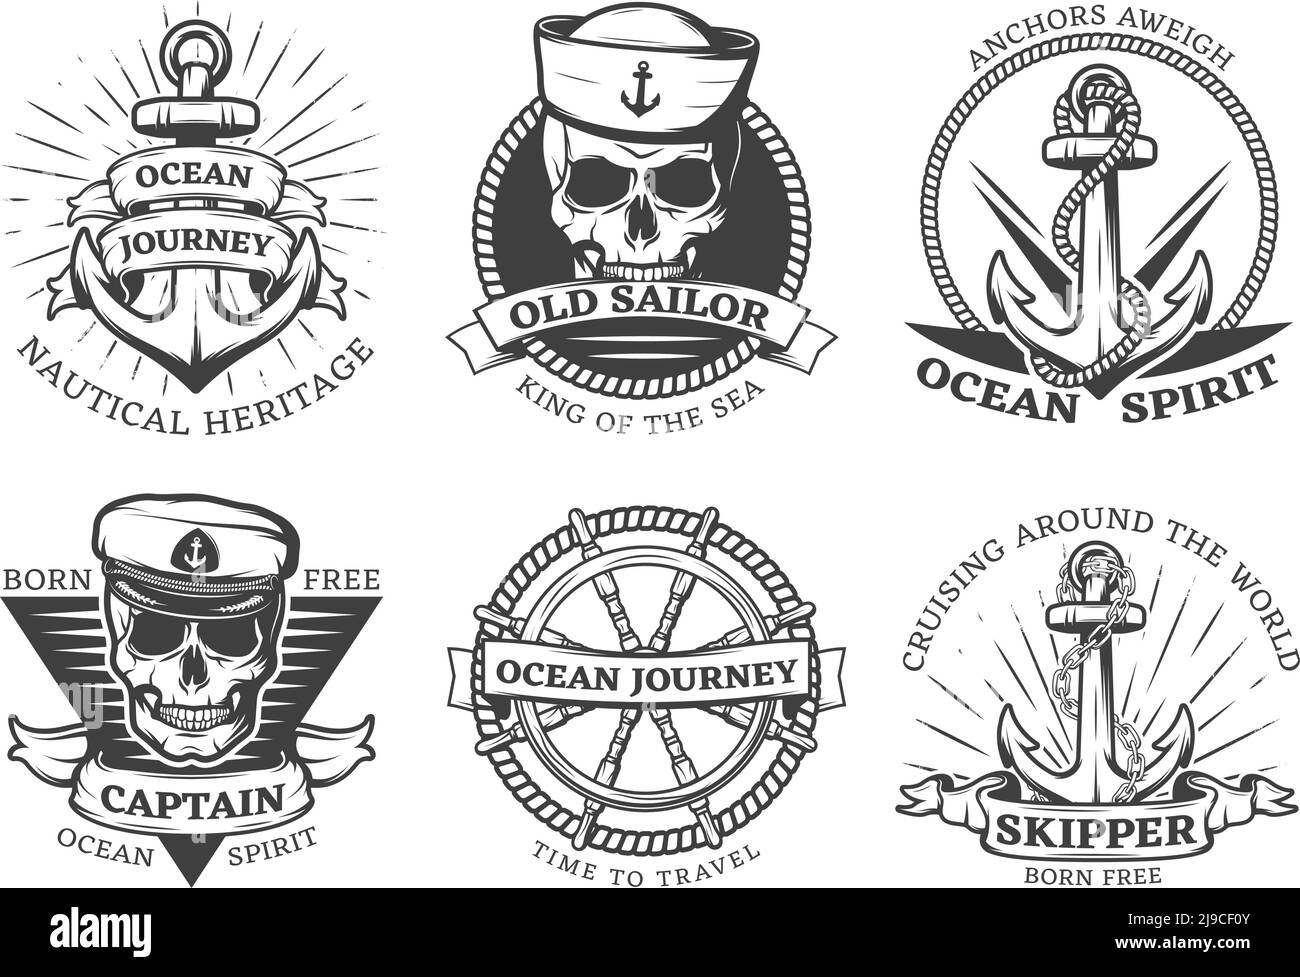 Anchors Aweigh Tattoo  867 Dulles Ave  2812618667